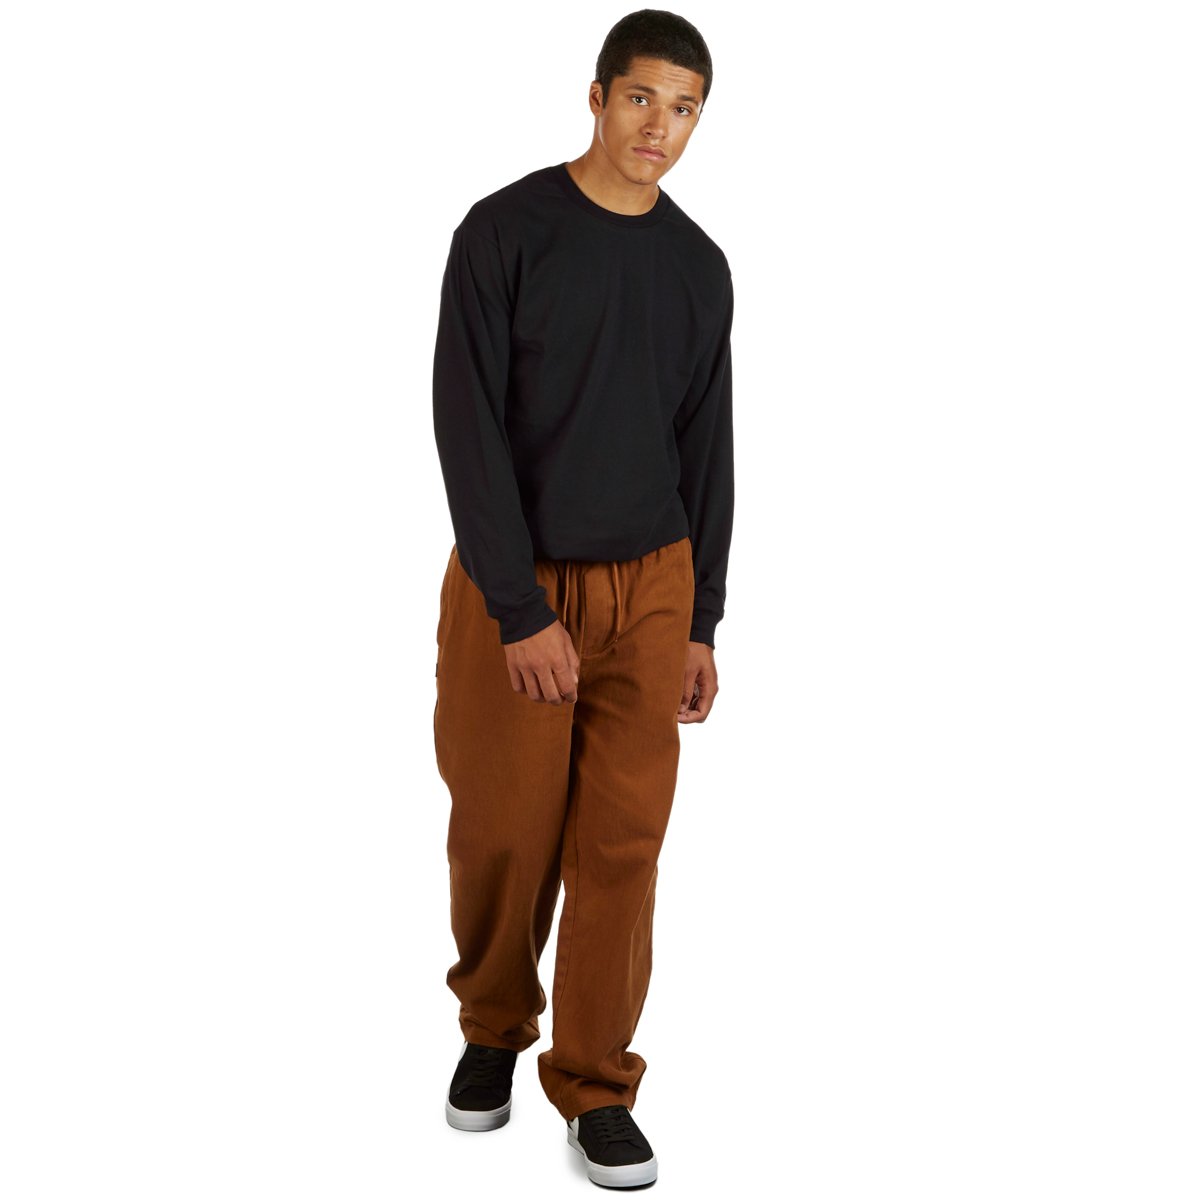 CCS Easy Twill Pants - Duck Brown image 2